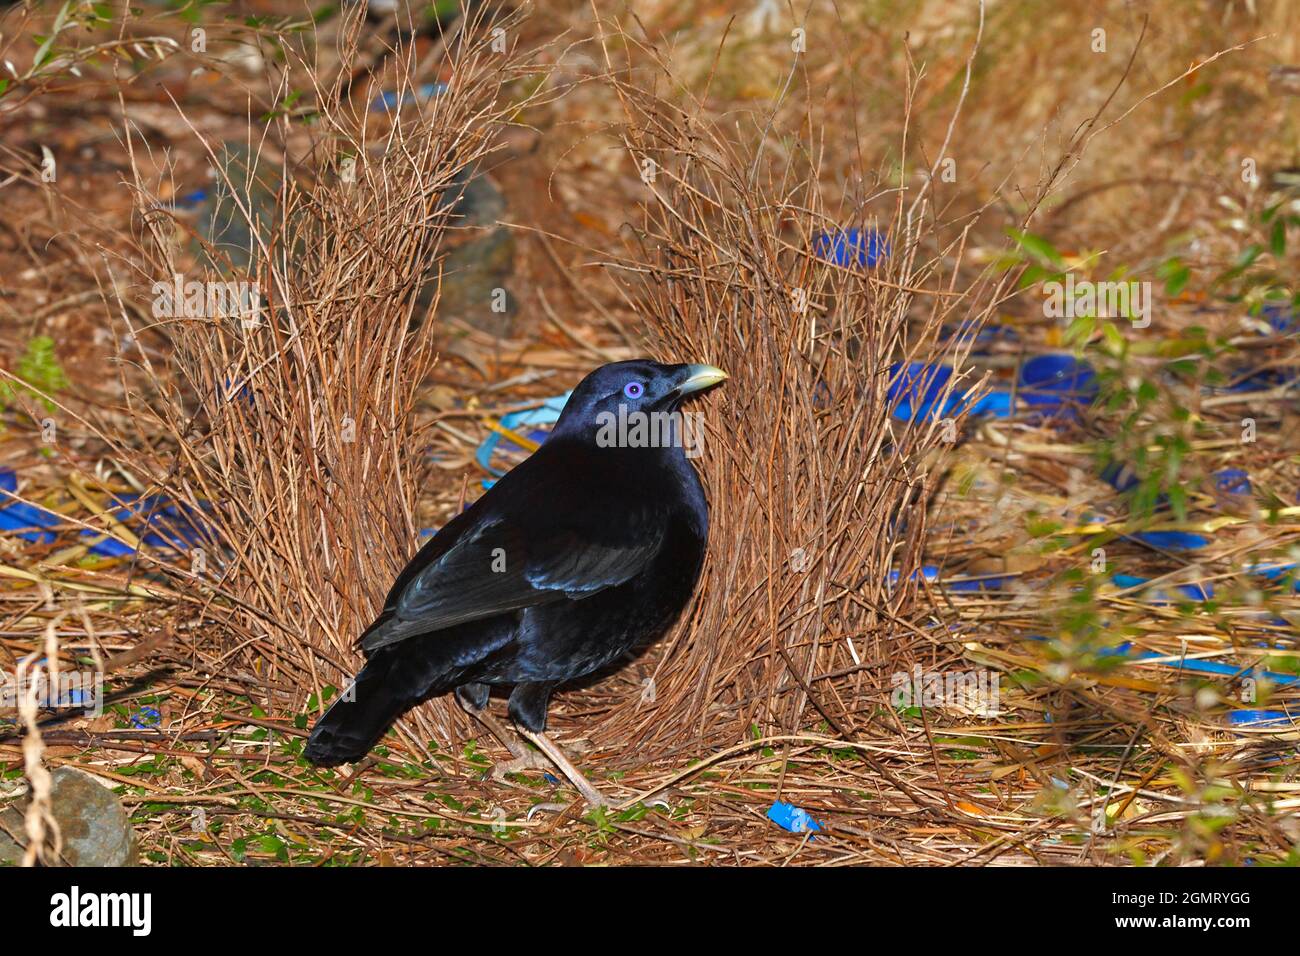 Male Satin Bowerbird, Ptilonorhynchus violaceus, standing in front of his bower.These birds use a bower made of sticks, decorated with blue and yellow Stock Photo